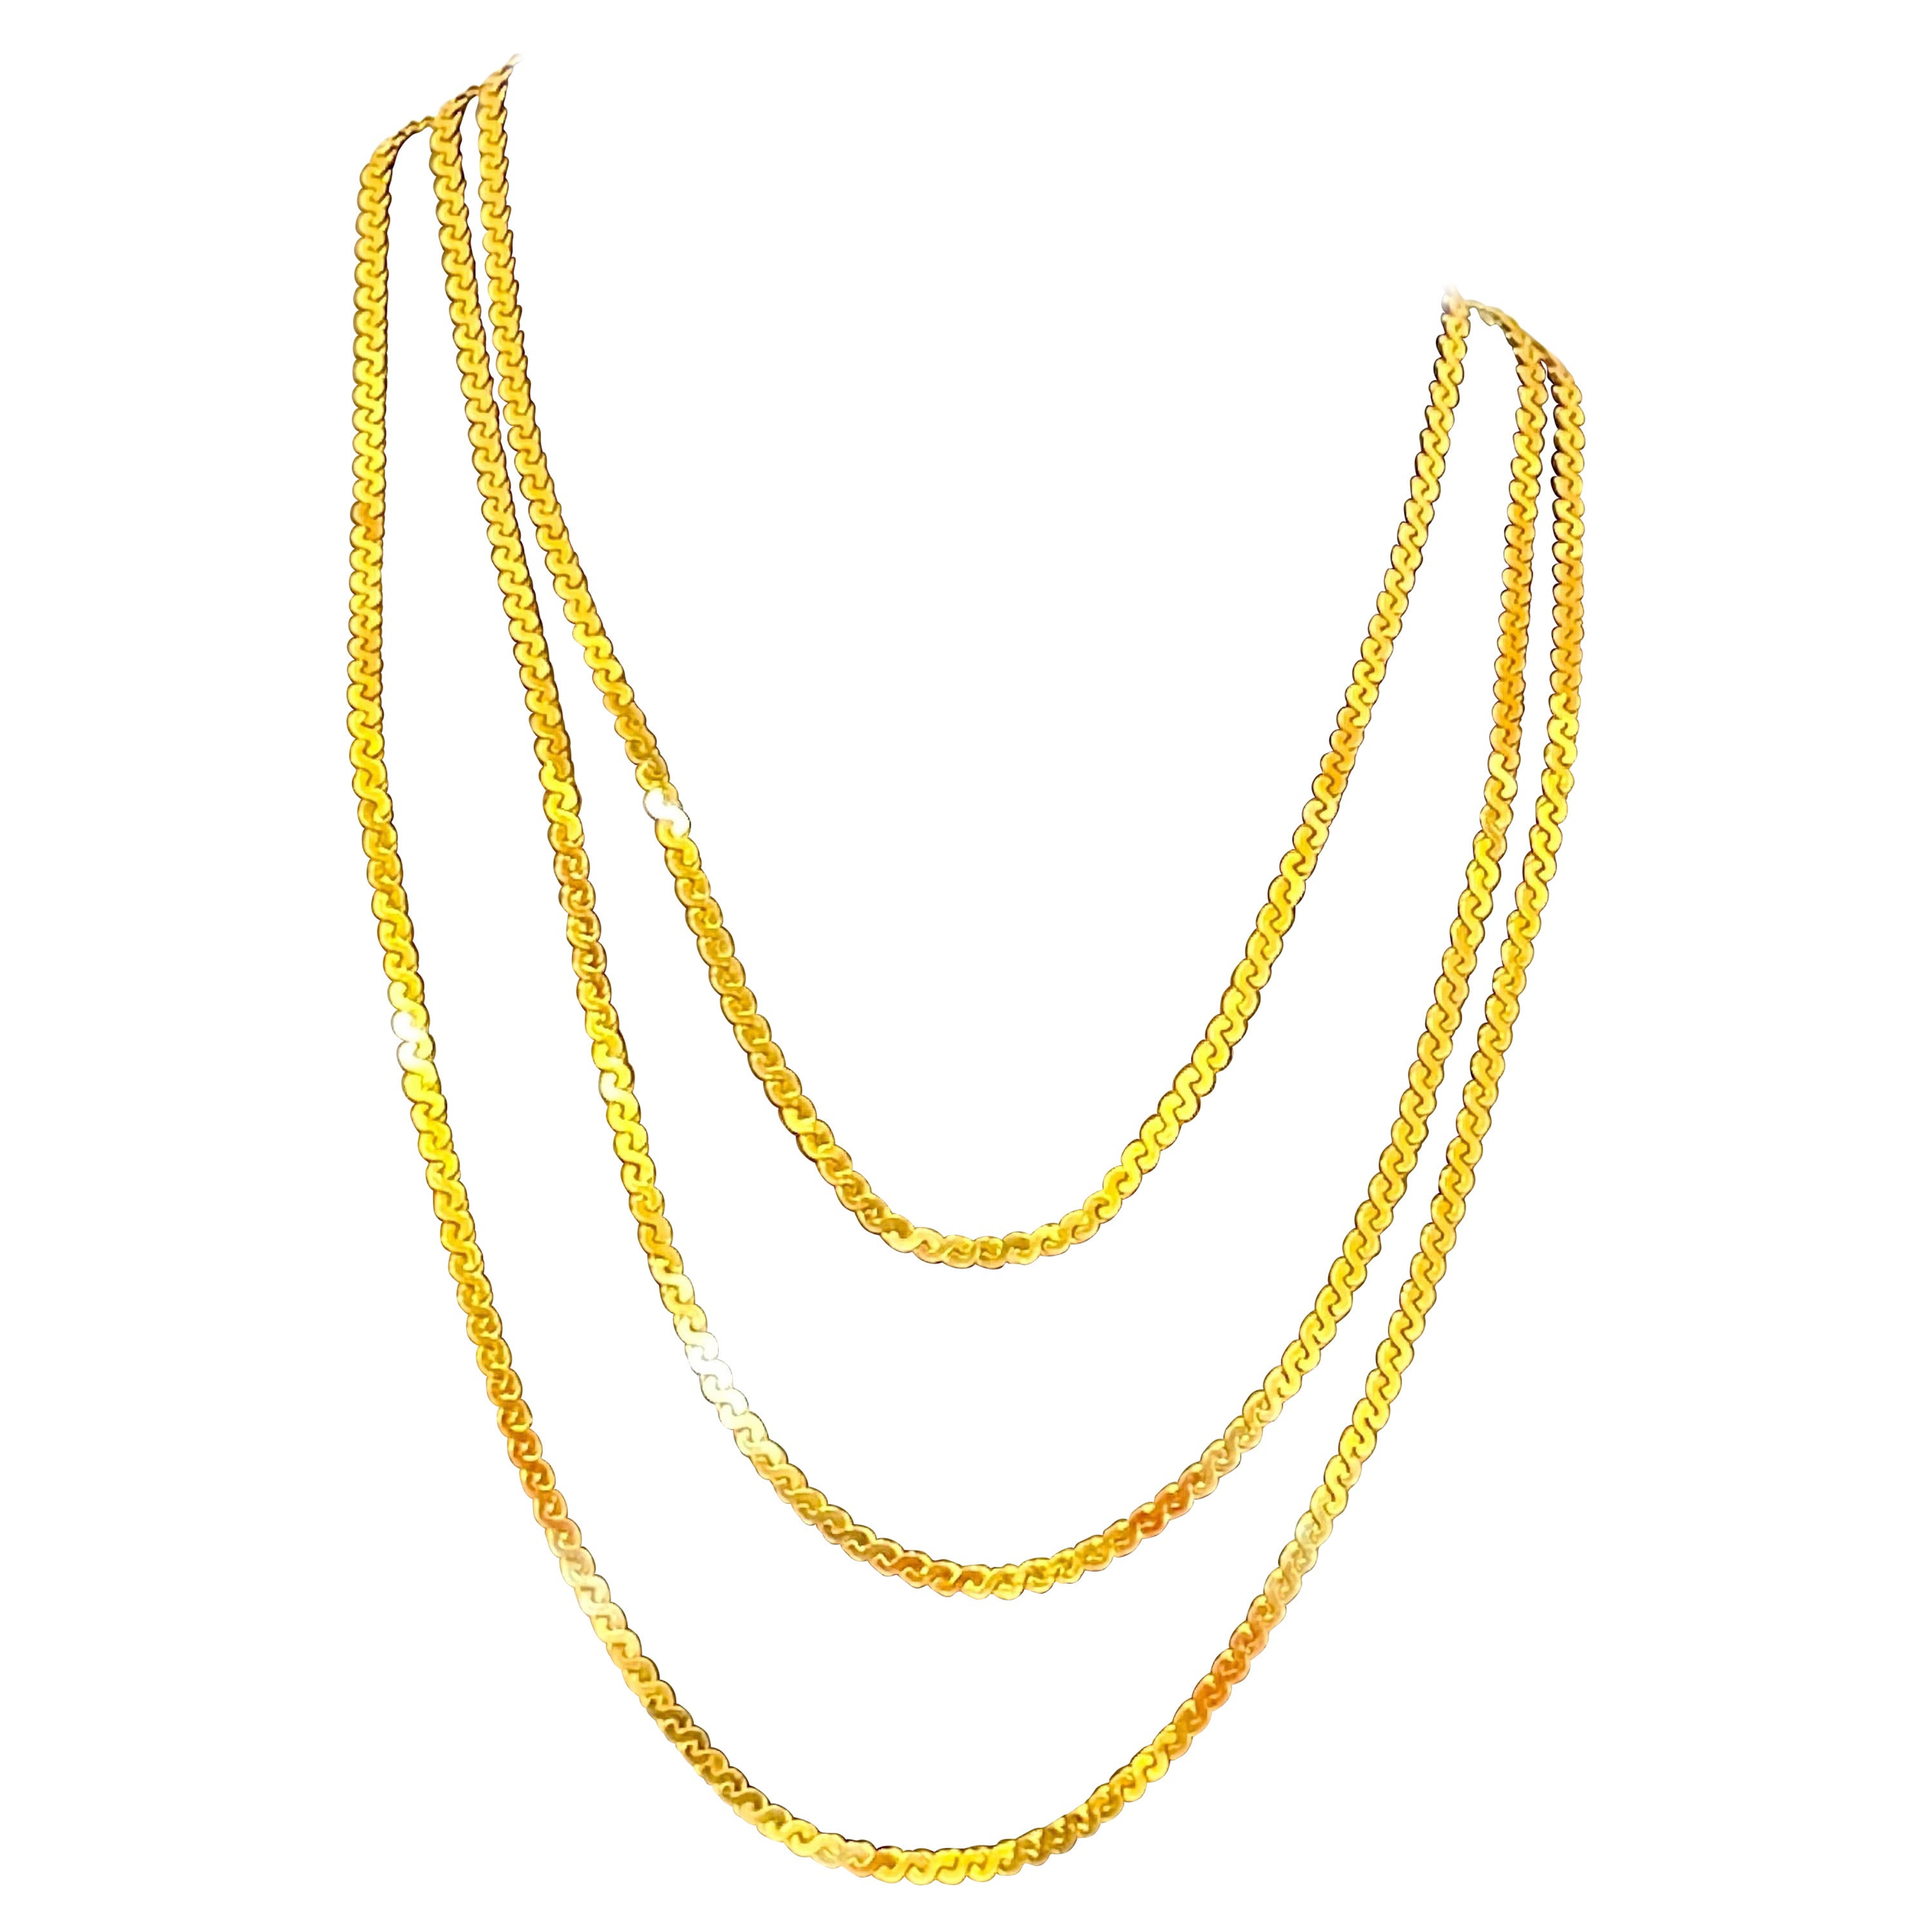 Vintage 18 Karat Yellow Gold 12.7 Gm S link Chain Necklace, 22 Inch ...